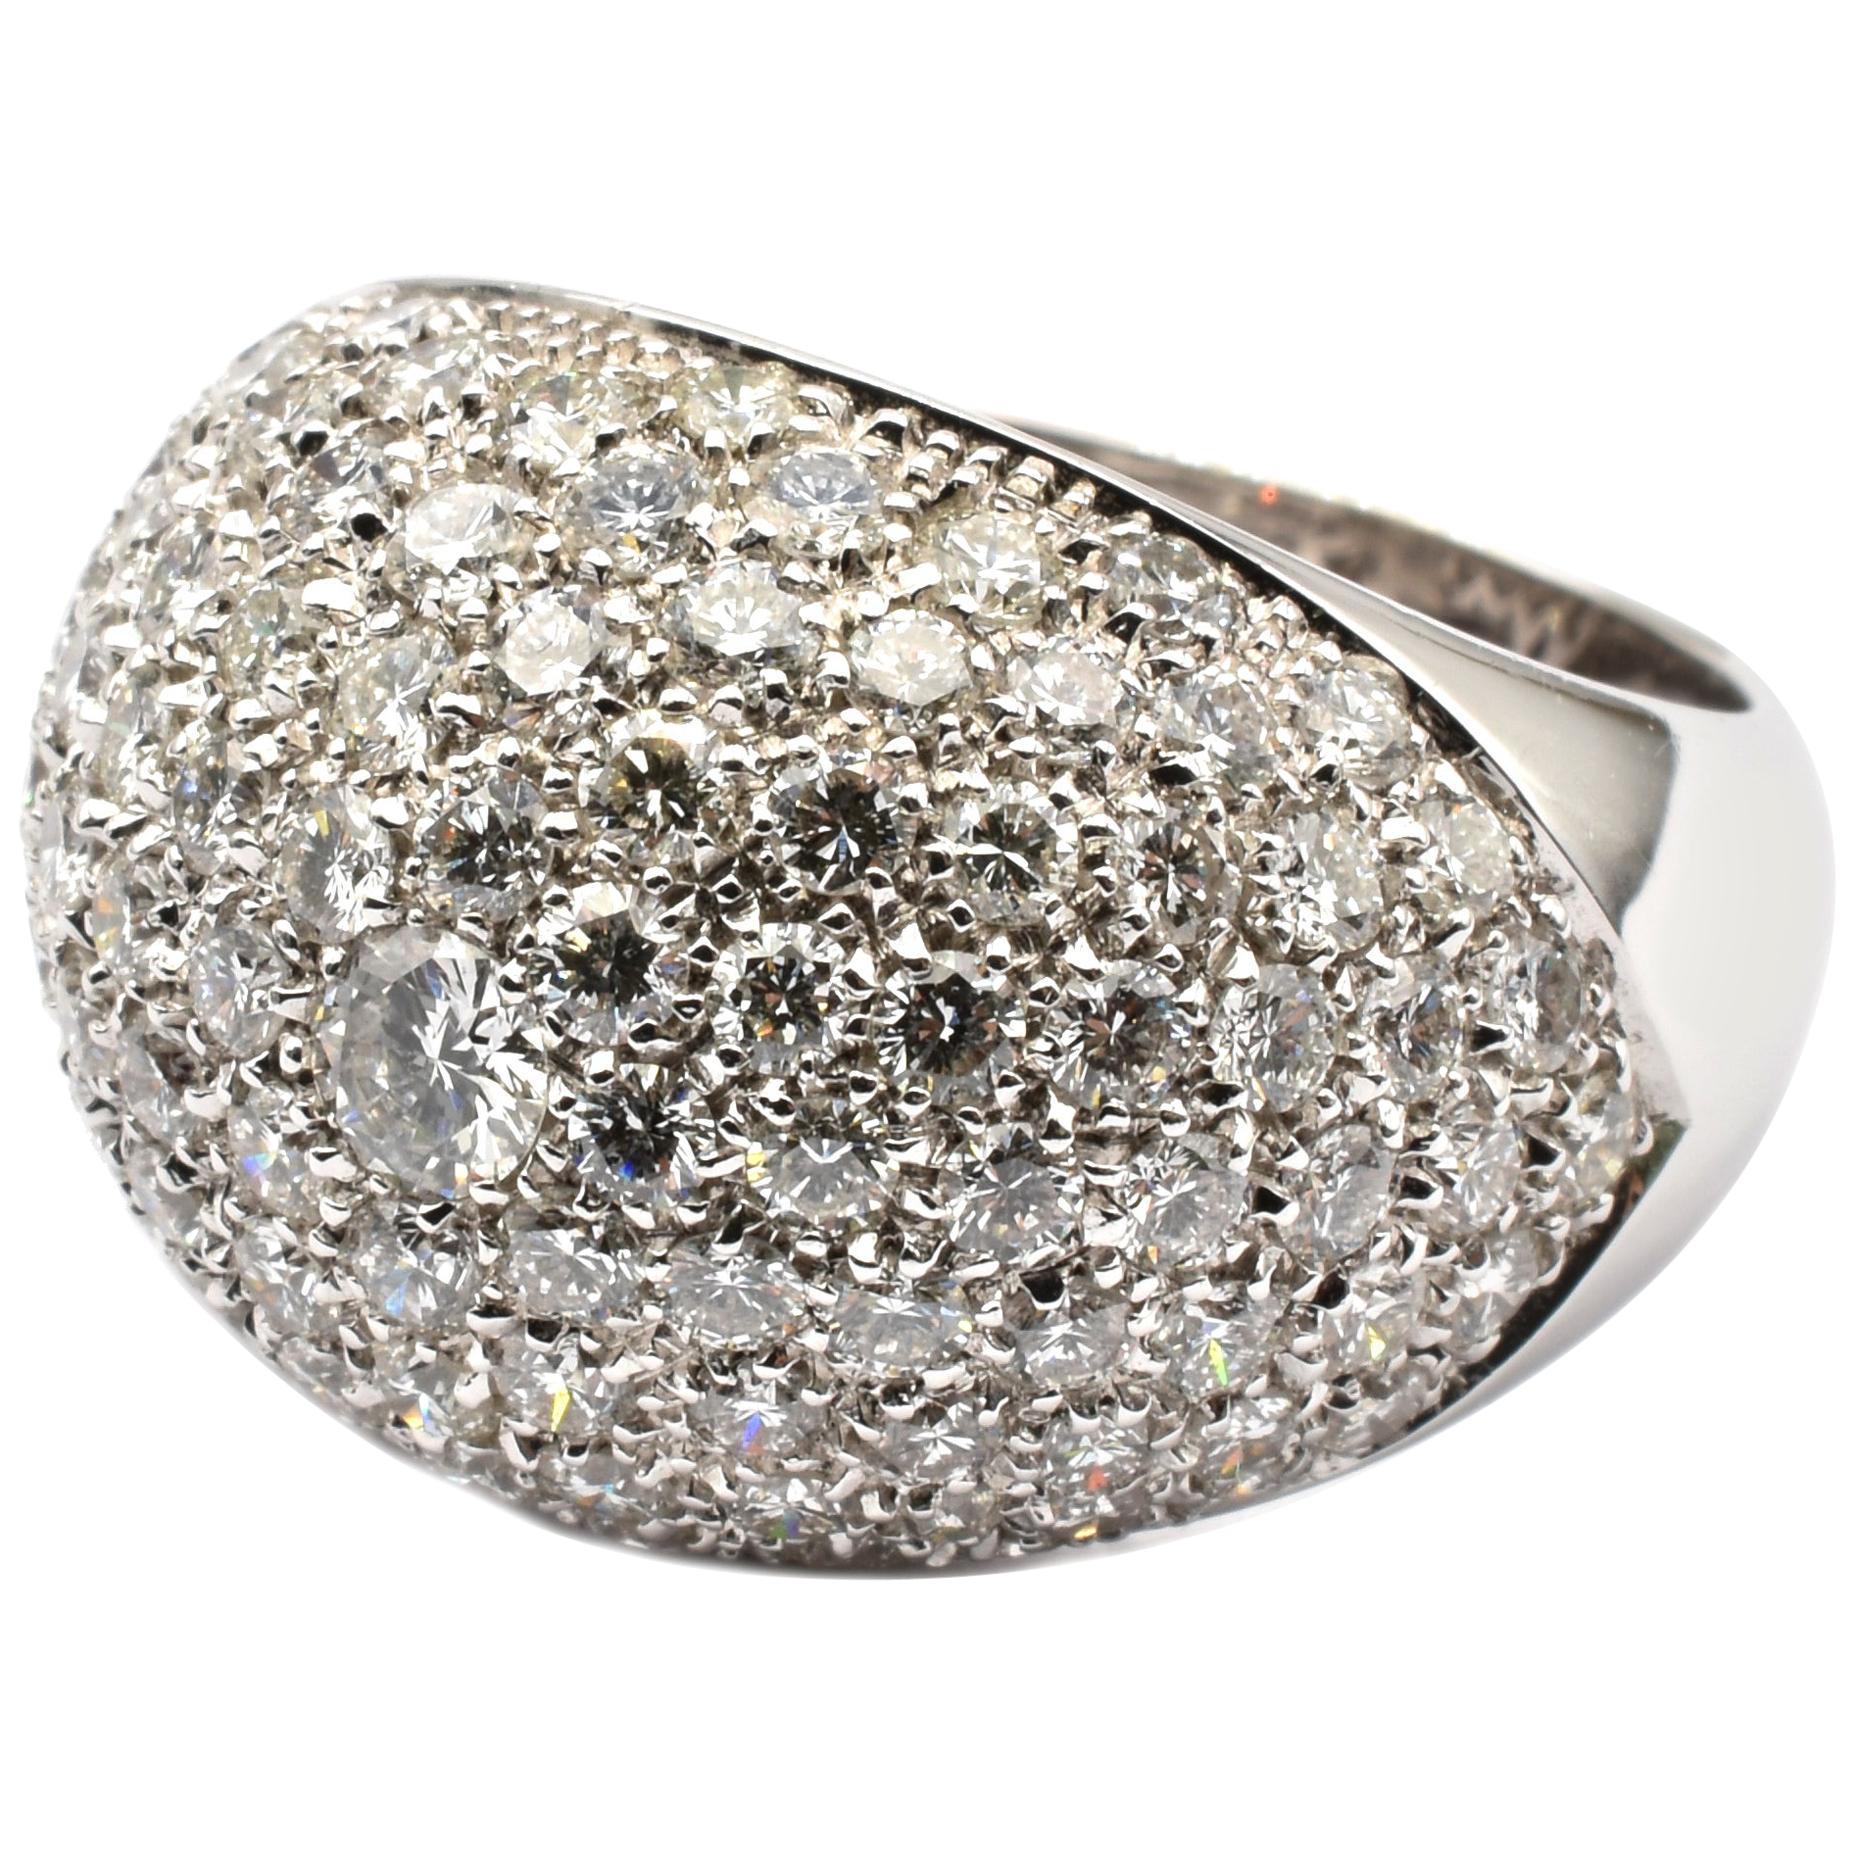 Gilberto Cassola White Gold Pavee Diamond Ring Made in Italy